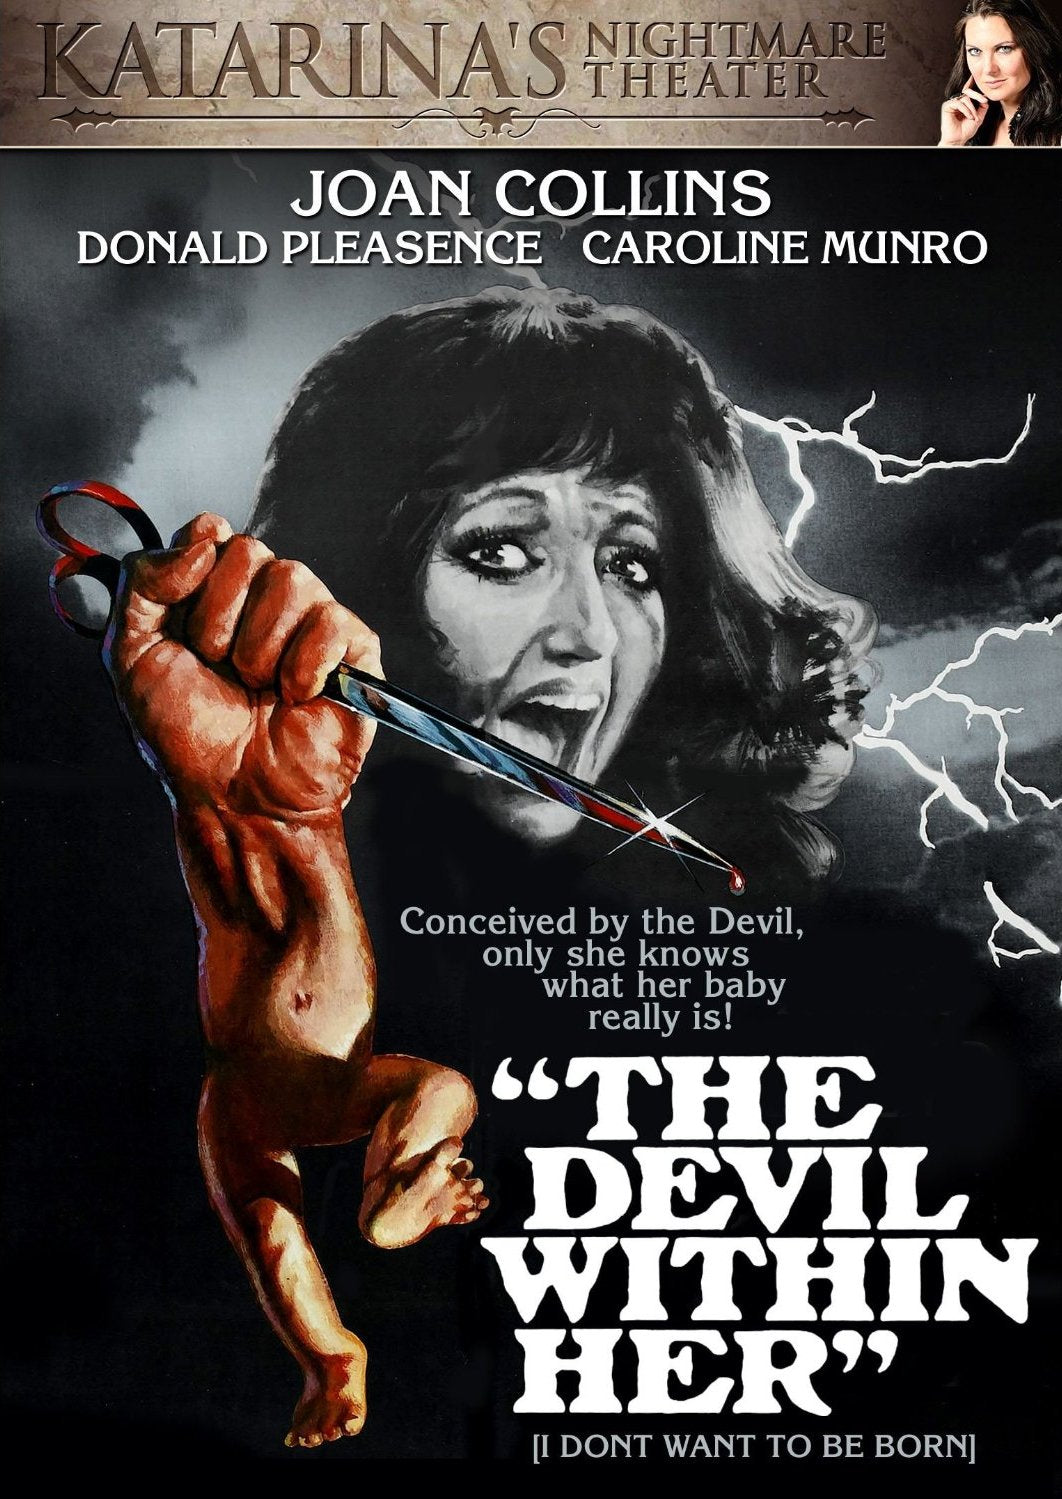 THE DEVIL WITHIN HER DVD